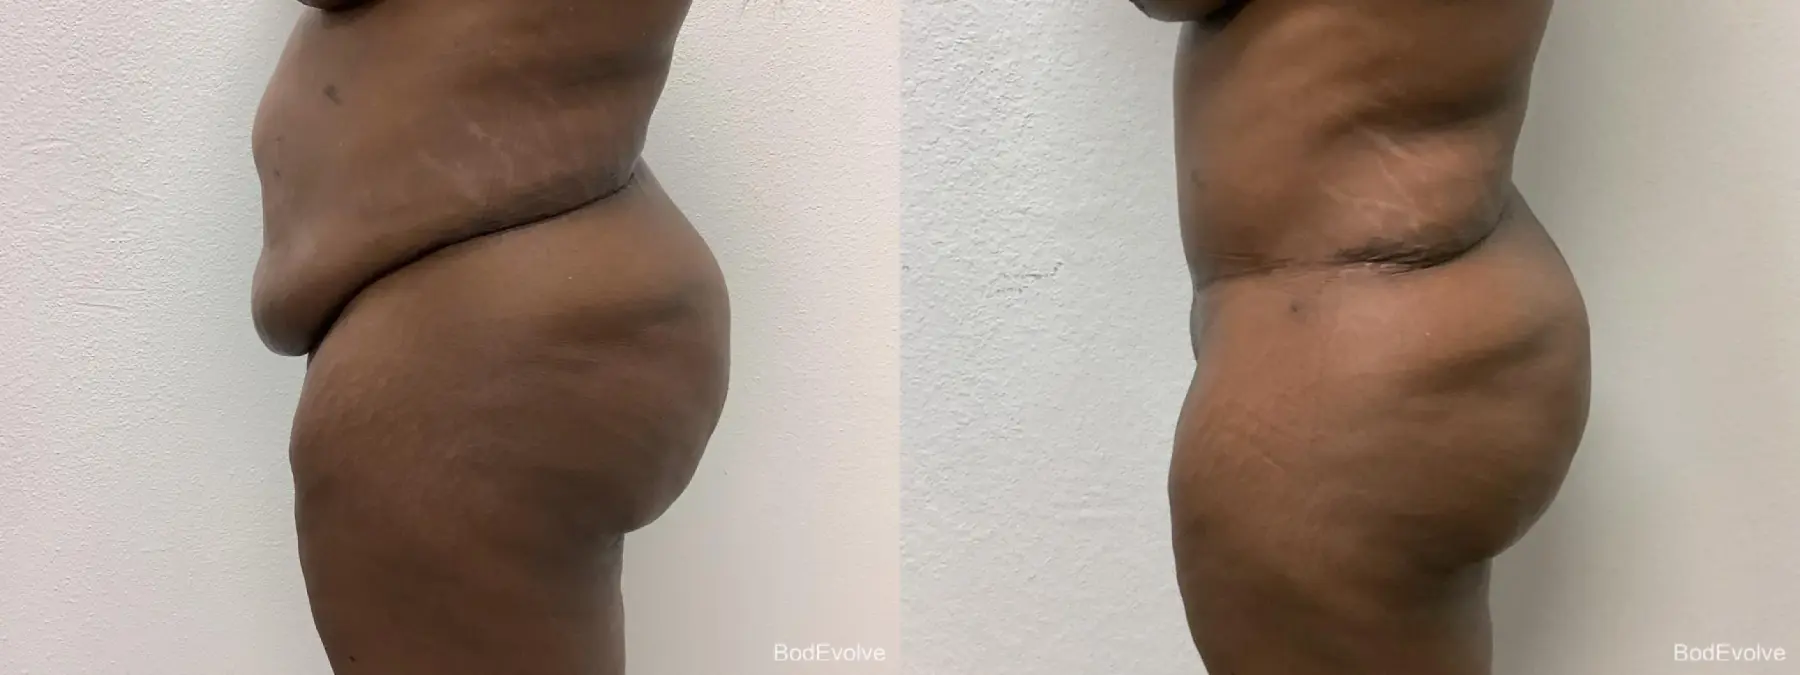 Tummy Tuck: Patient 2 - Before and After 5